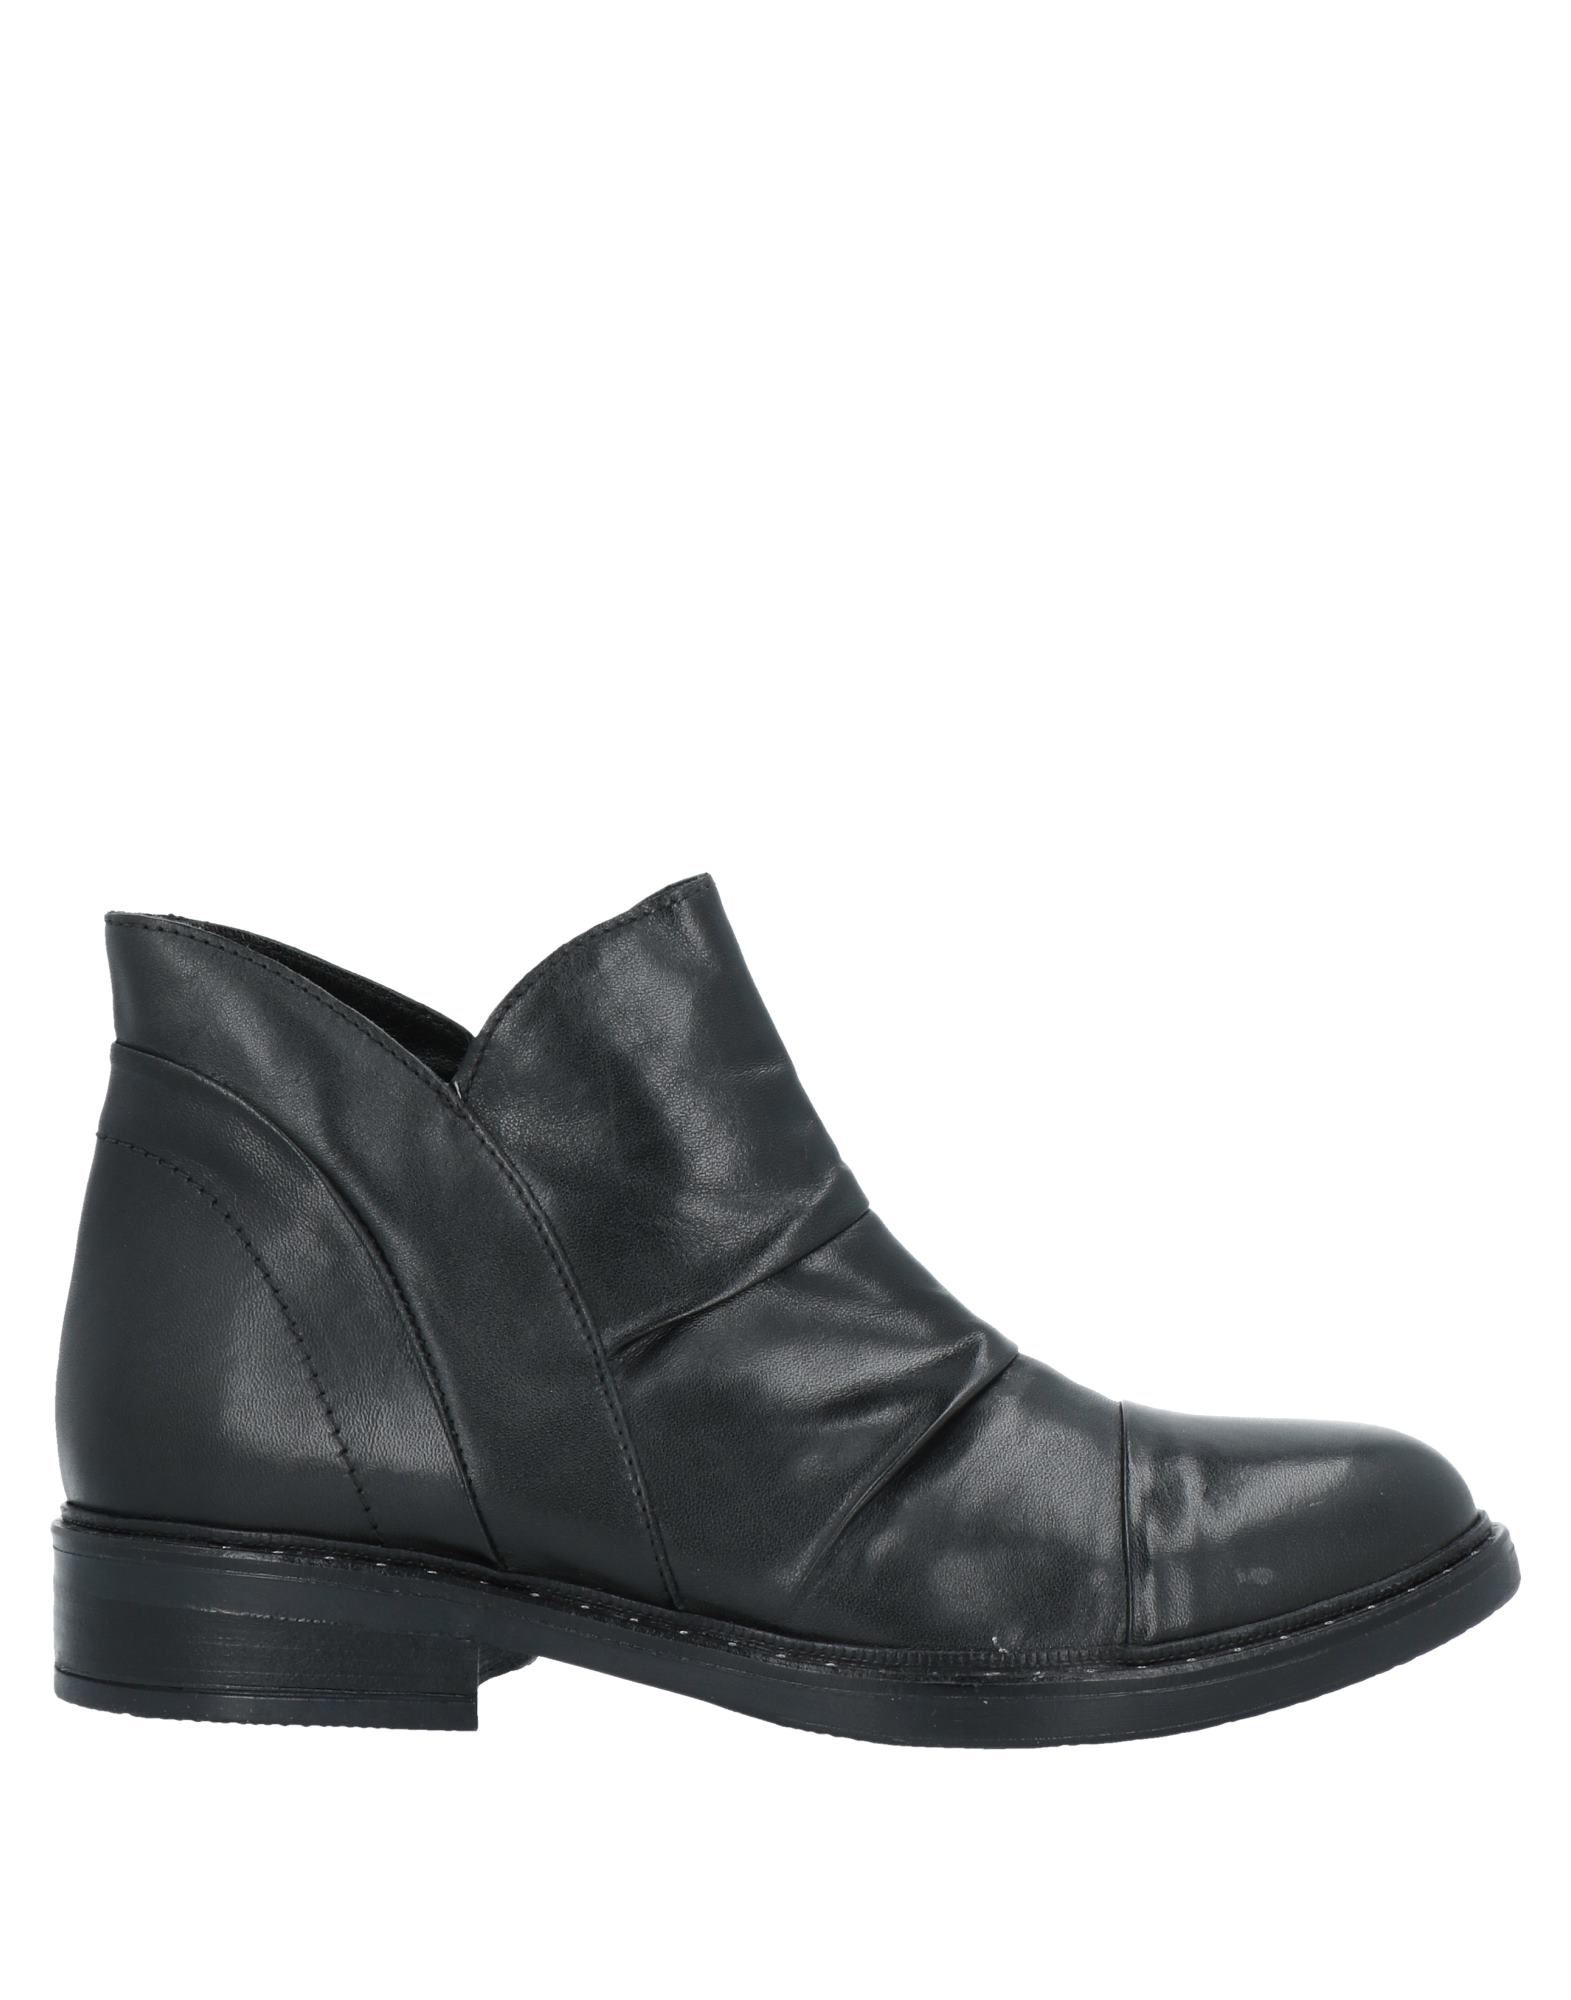 IRONY GLAM Ankle boots